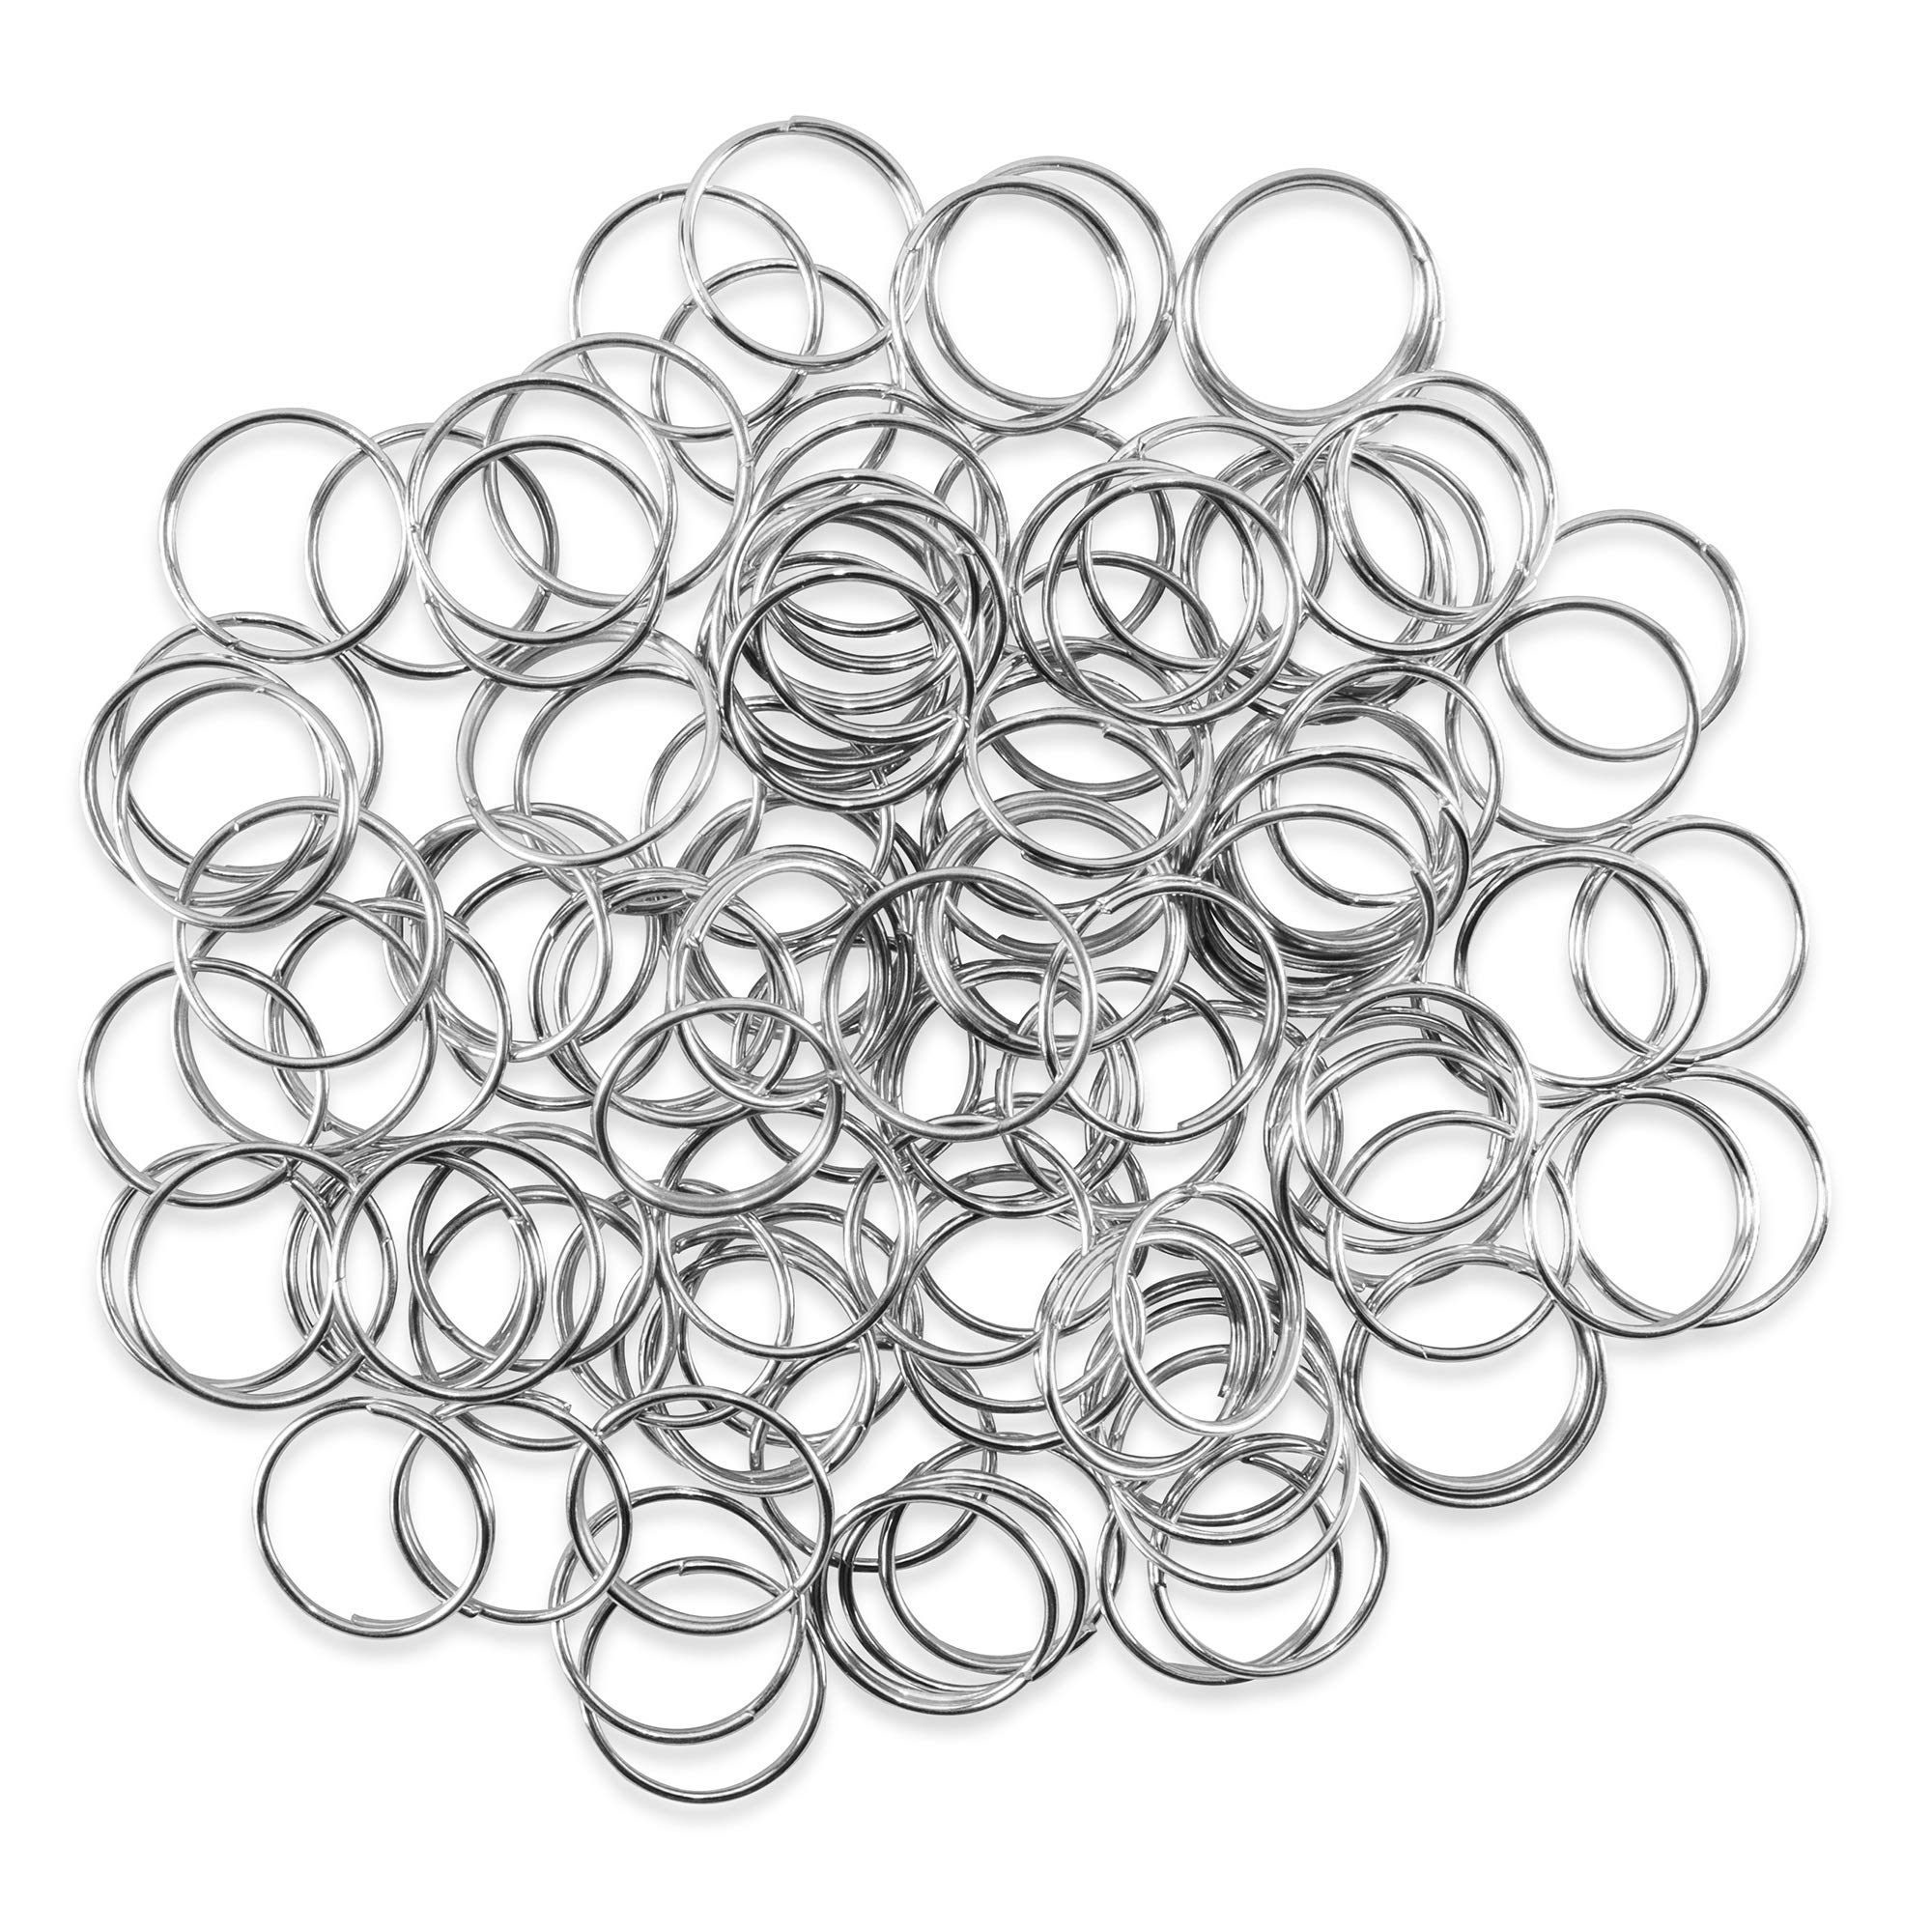 100 Piece Mini Stainless Steel Split Rings Connectors for Arts & Crafts  Chandelier Necklaces Homemade Jewelry